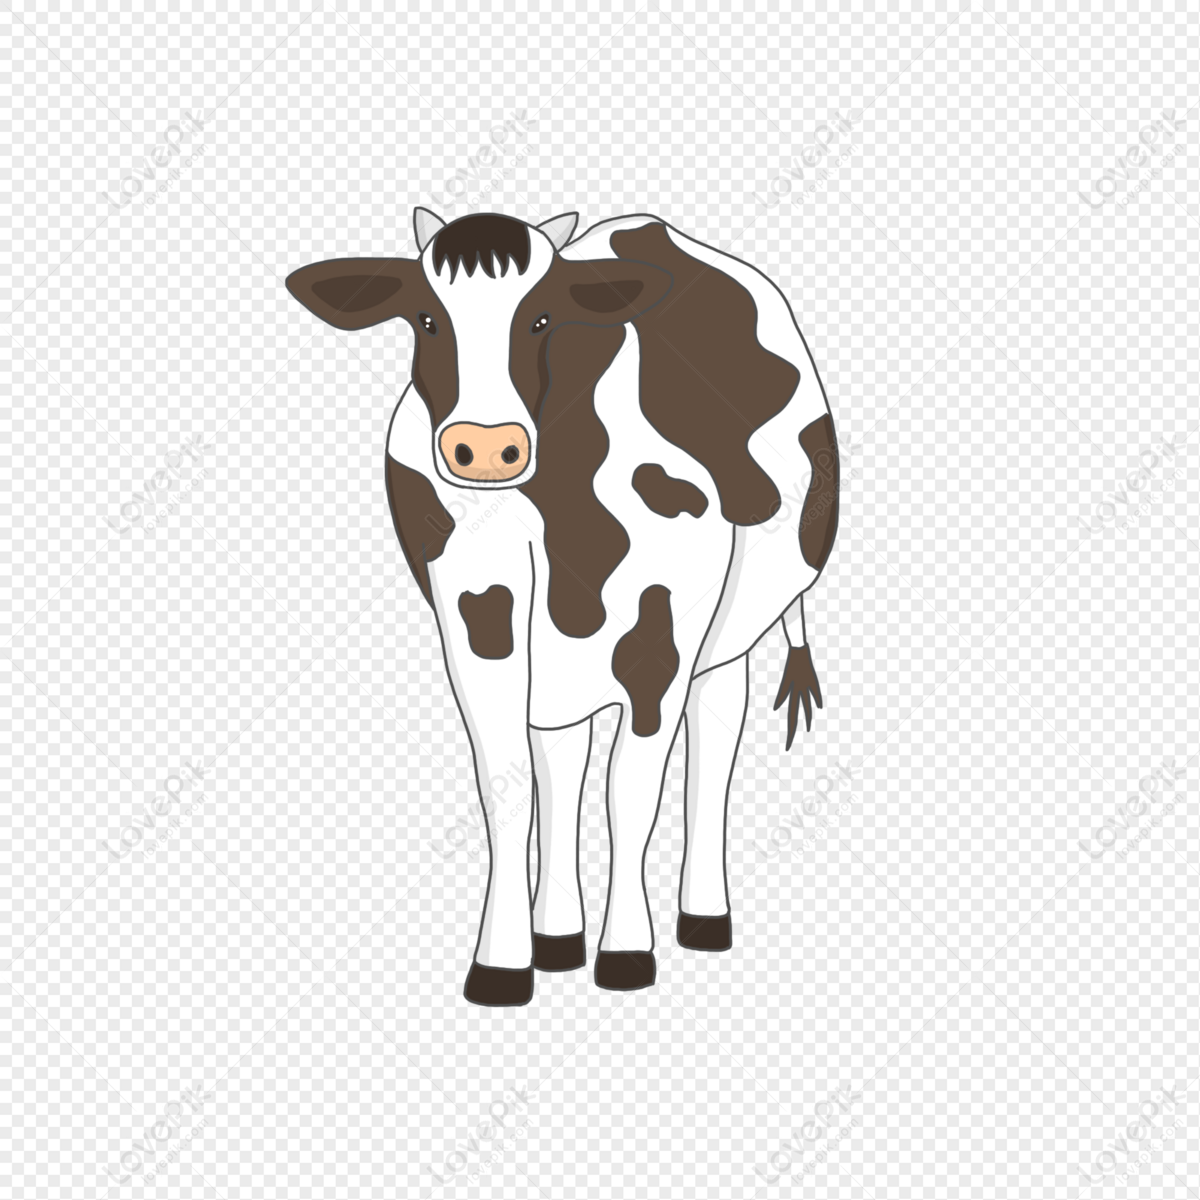 Iconic image of serious cow symbolizing agriculture png download -  3072*3072 - Free Transparent Cow png Download. - CleanPNG / KissPNG